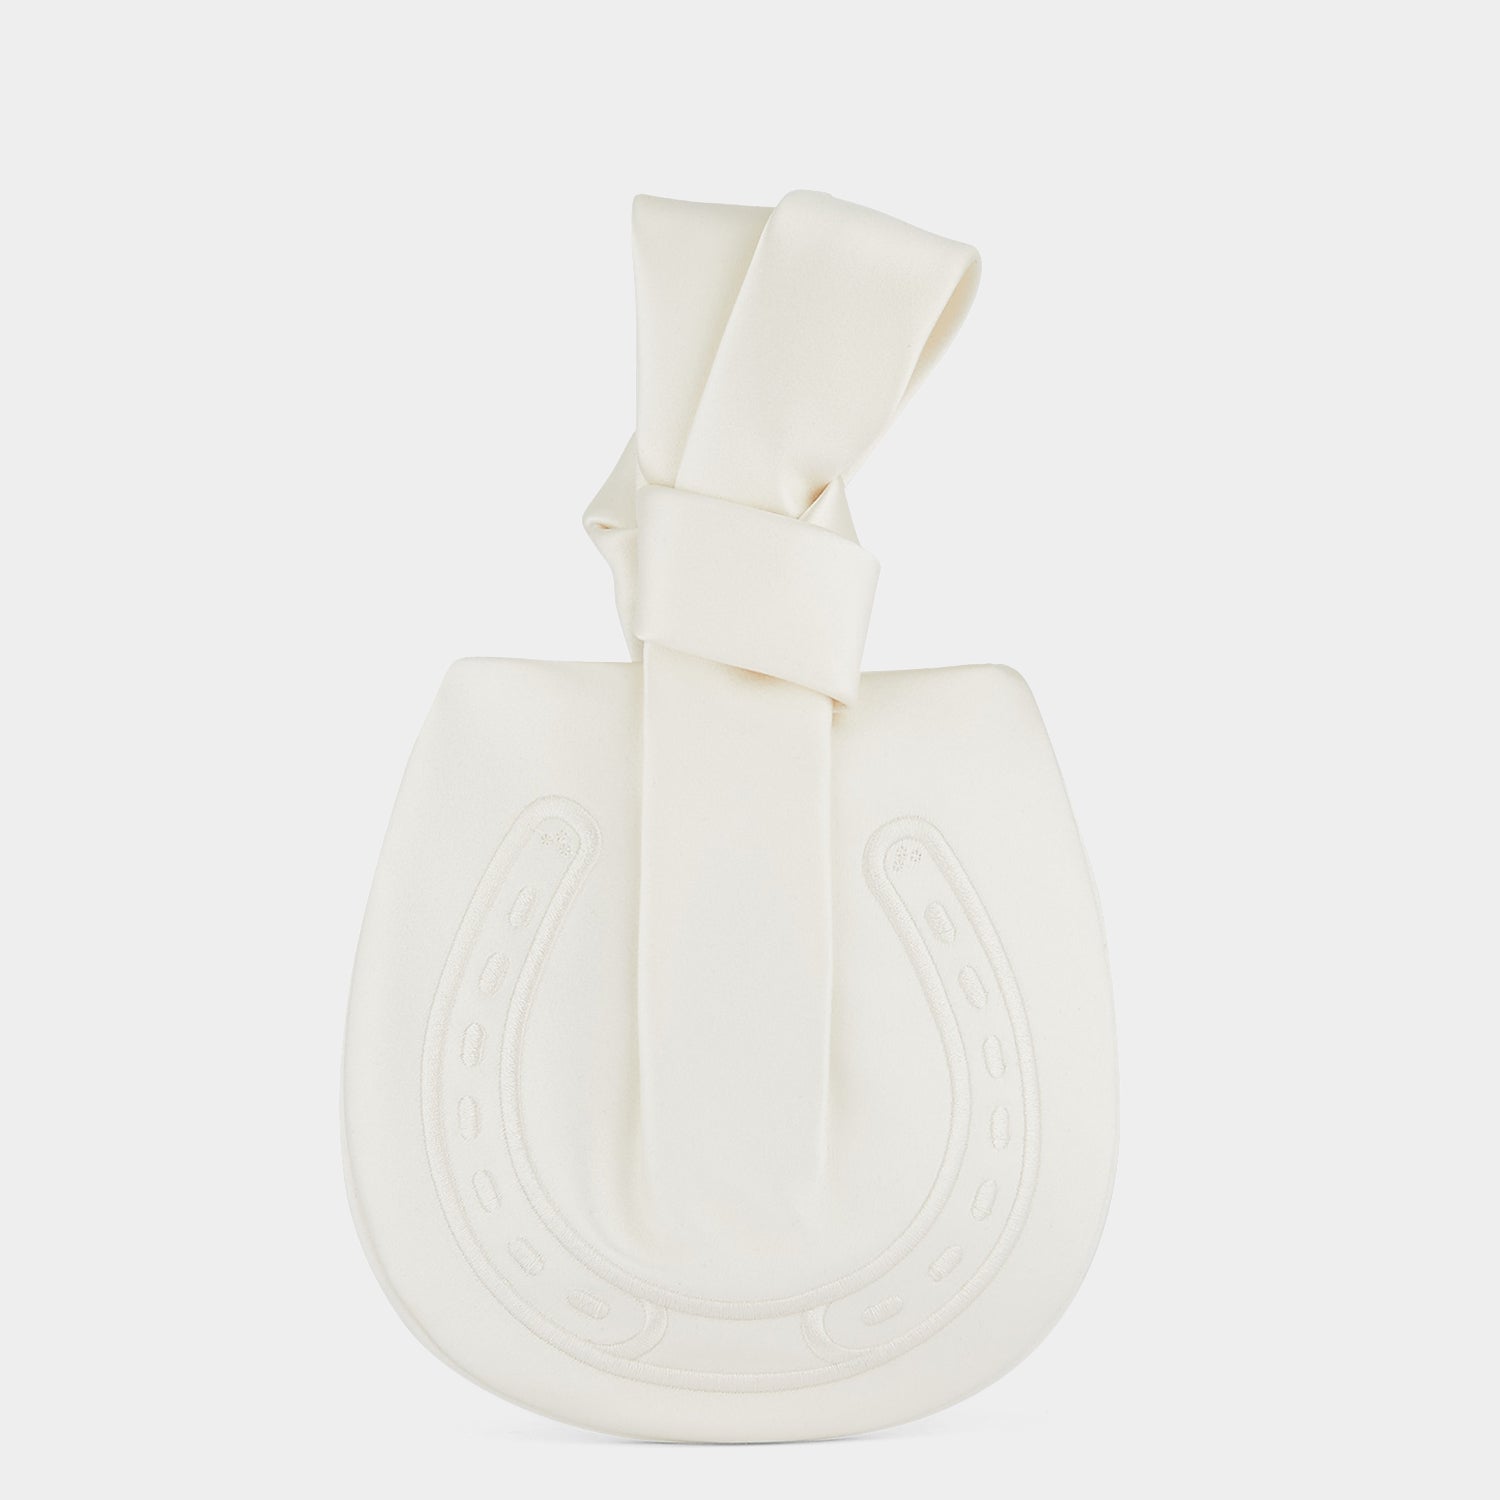 Tie the Knot Clutch -

                  
                    Double Satin in Ivory -
                  

                  Anya Hindmarch UK
